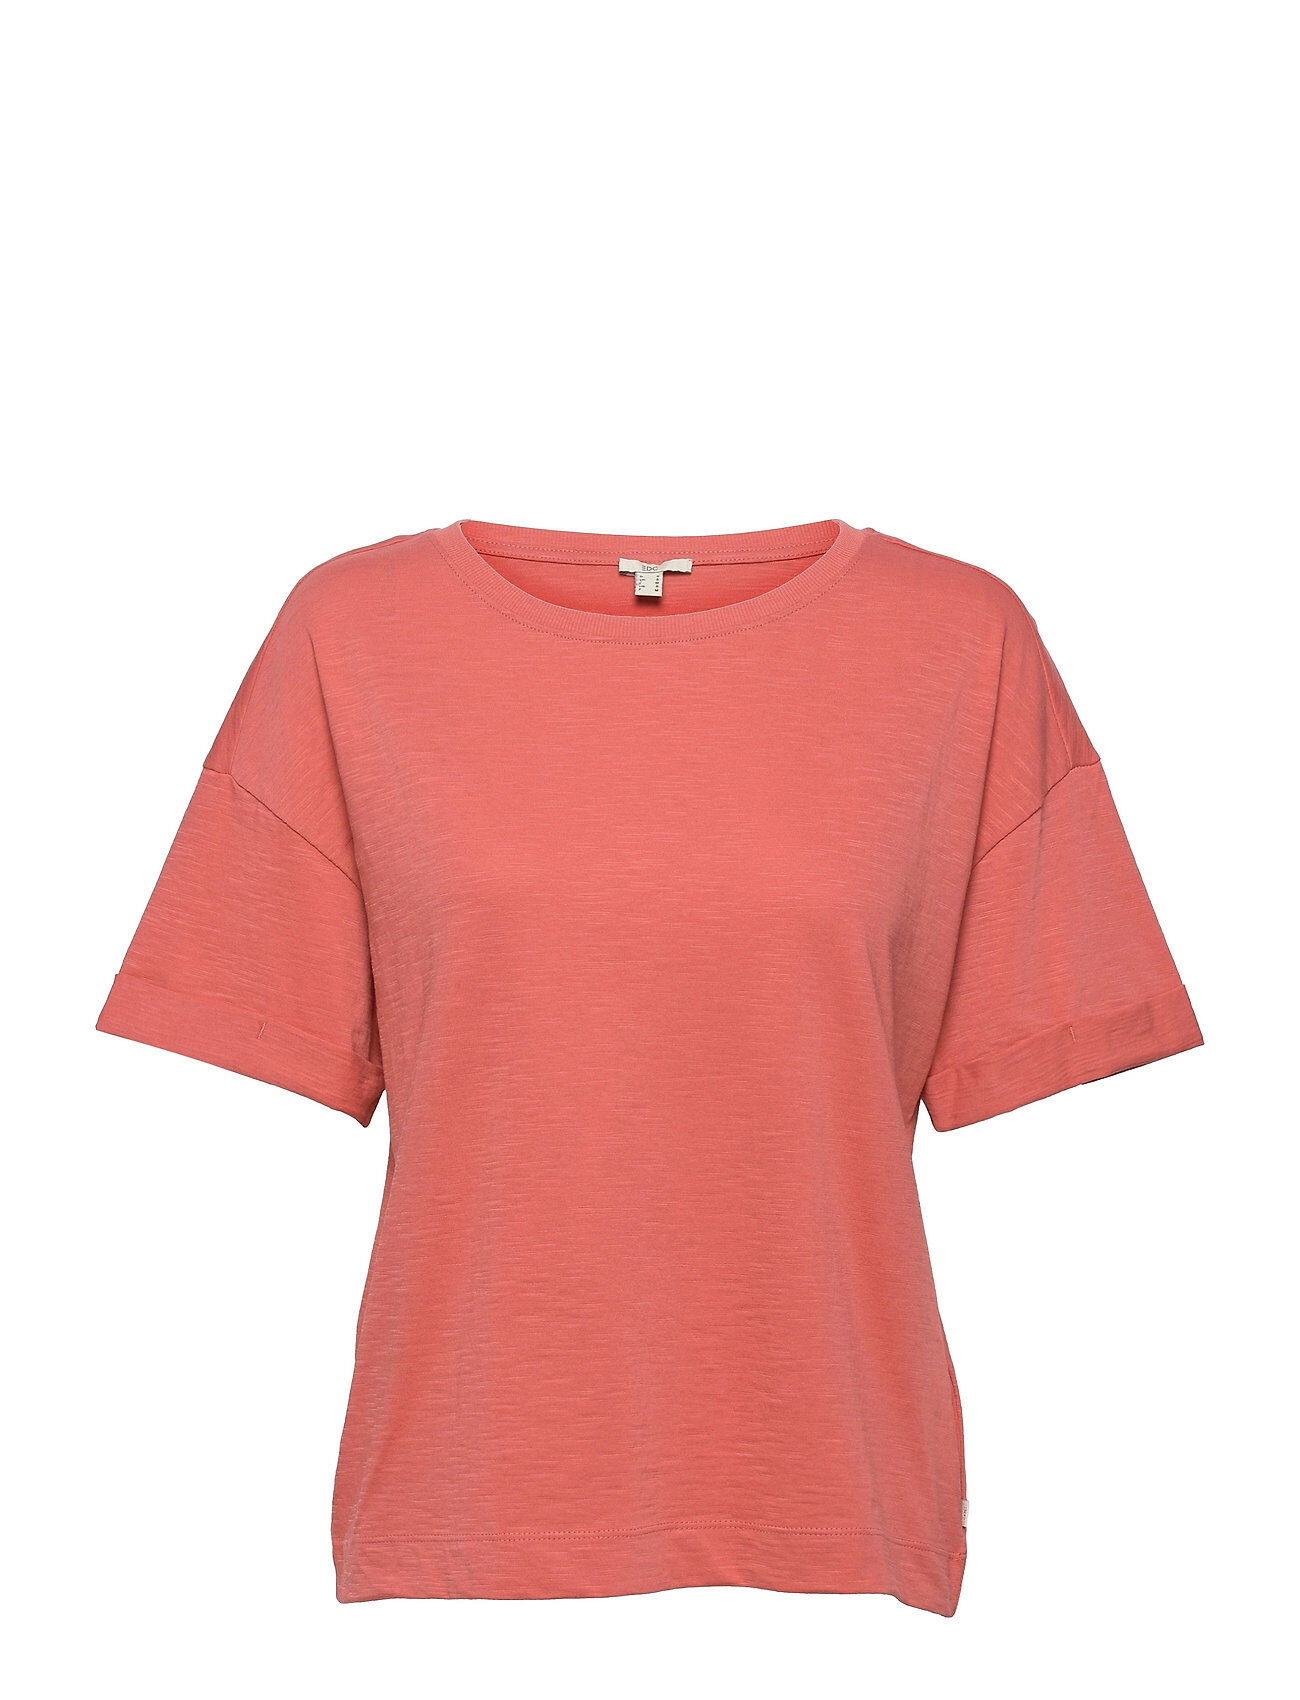 EDC by Esprit T-Shirts T-shirts & Tops Short-sleeved Rosa EDC By Esprit